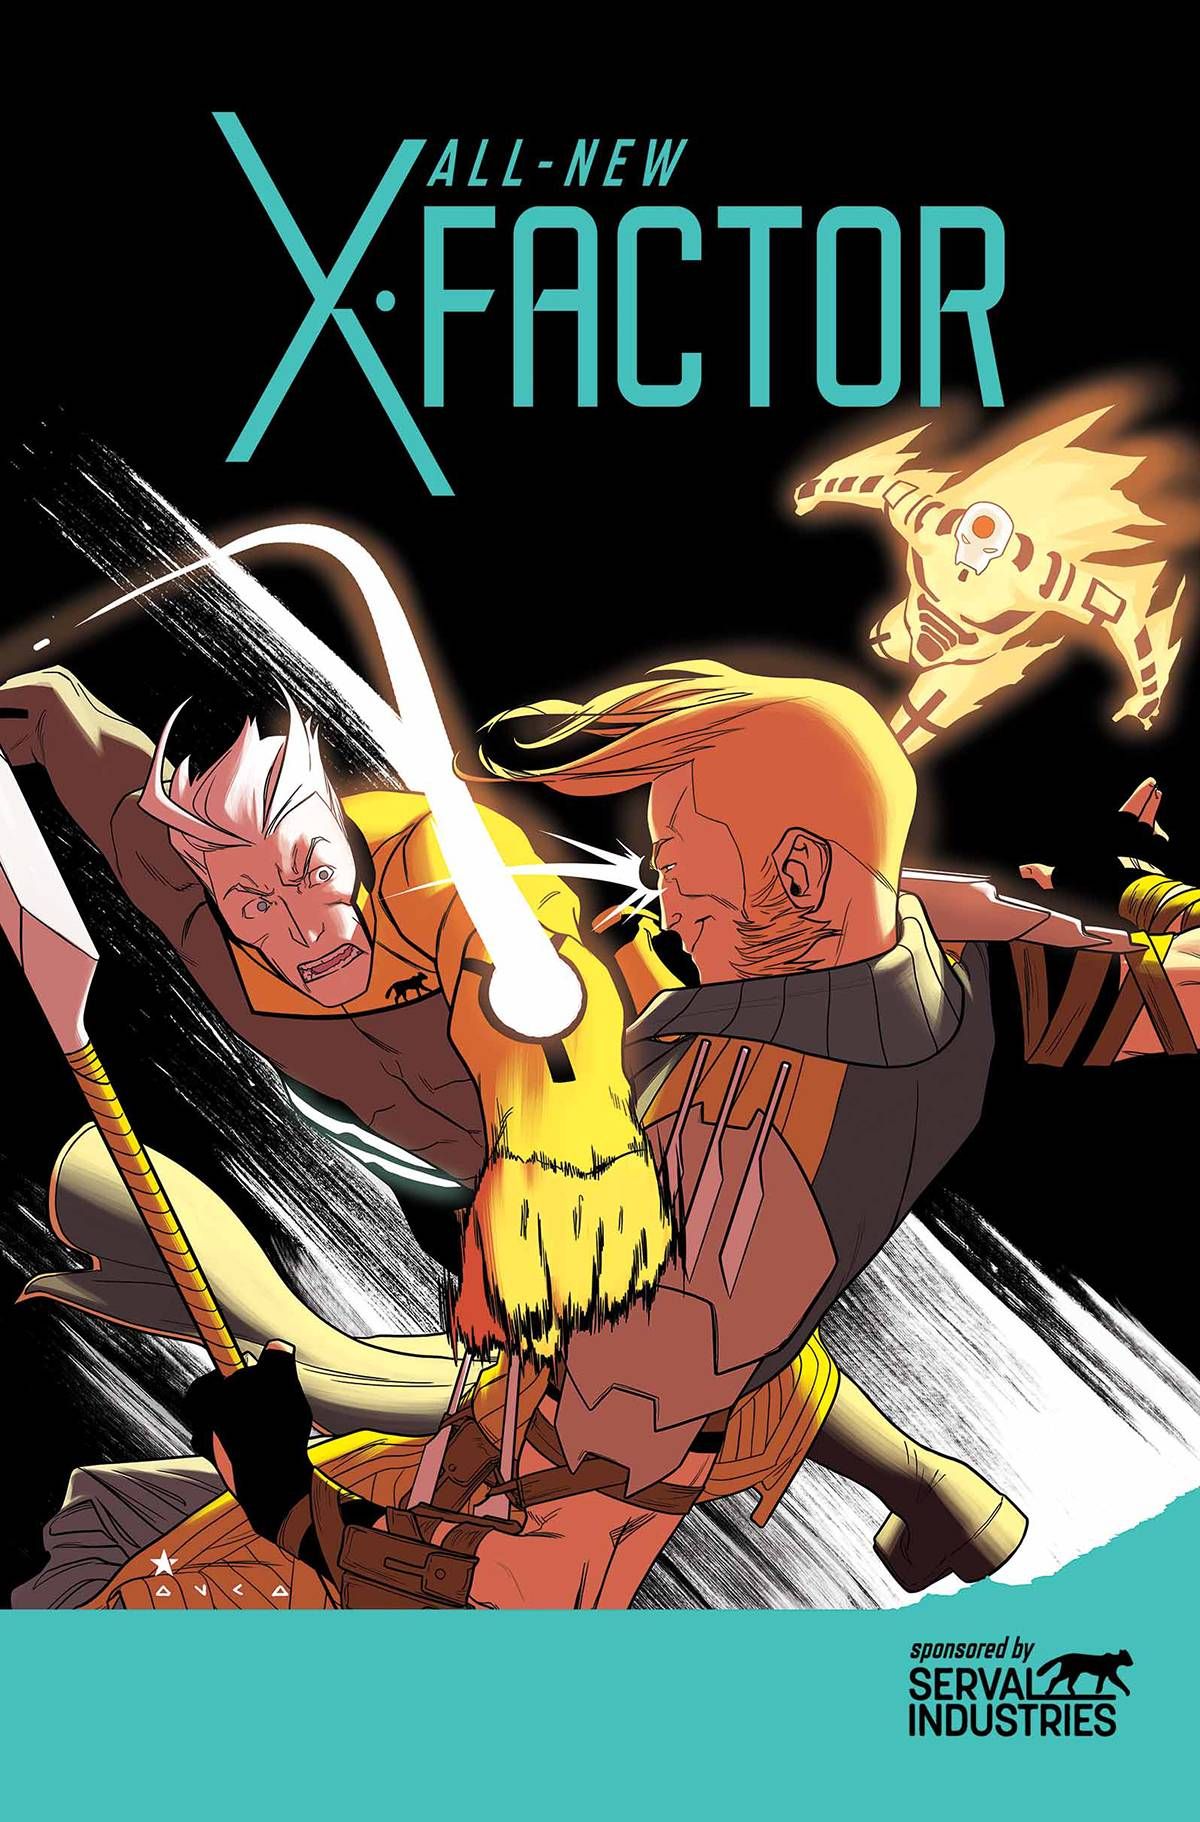 All New X-factor #17 Comic